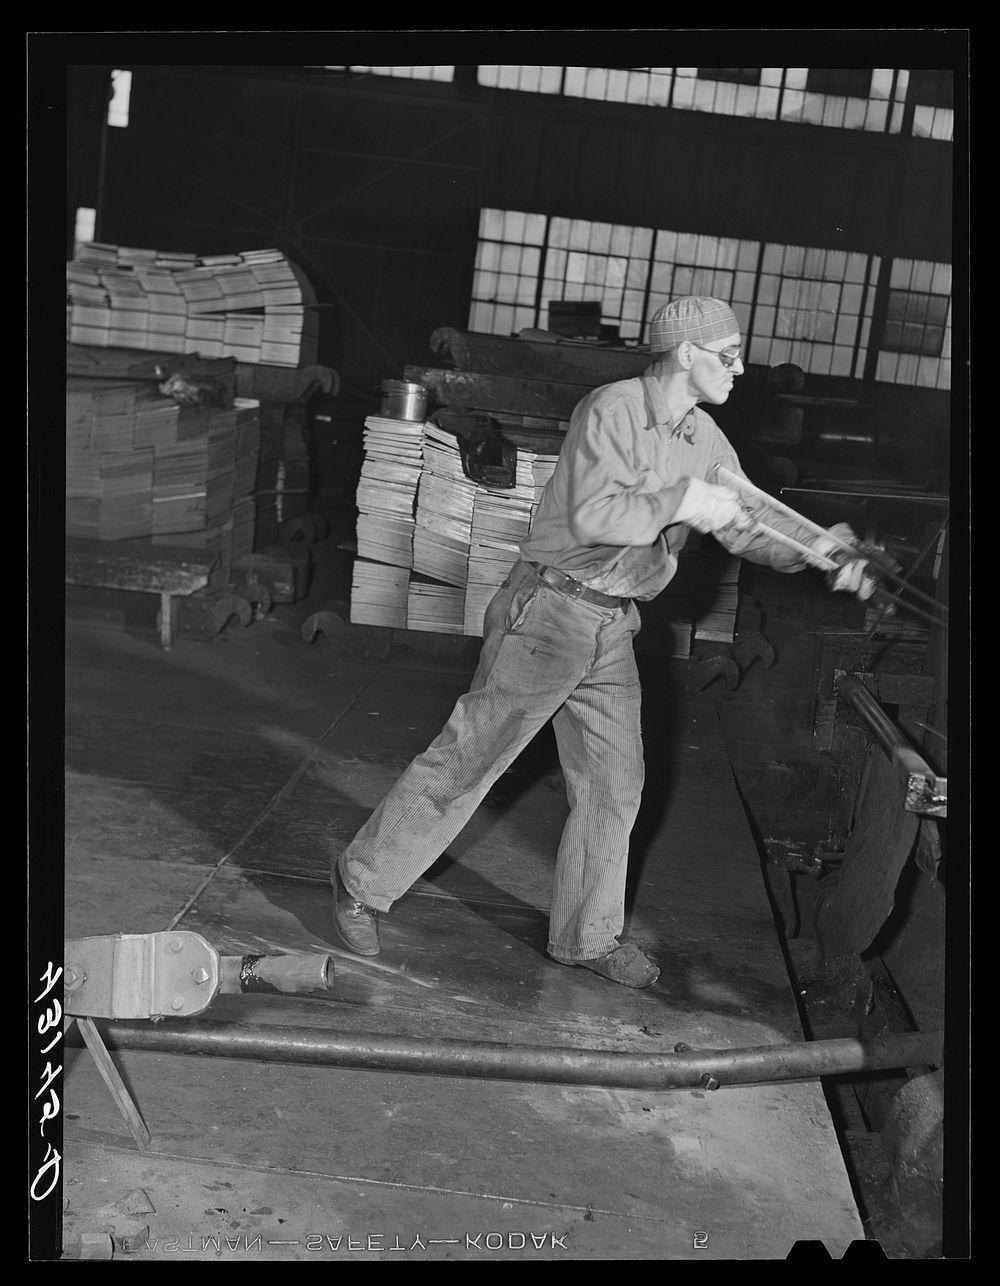 Worker in Washington Tinplate Company. Washington, Pennsylvania. Sourced from the Library of Congress.